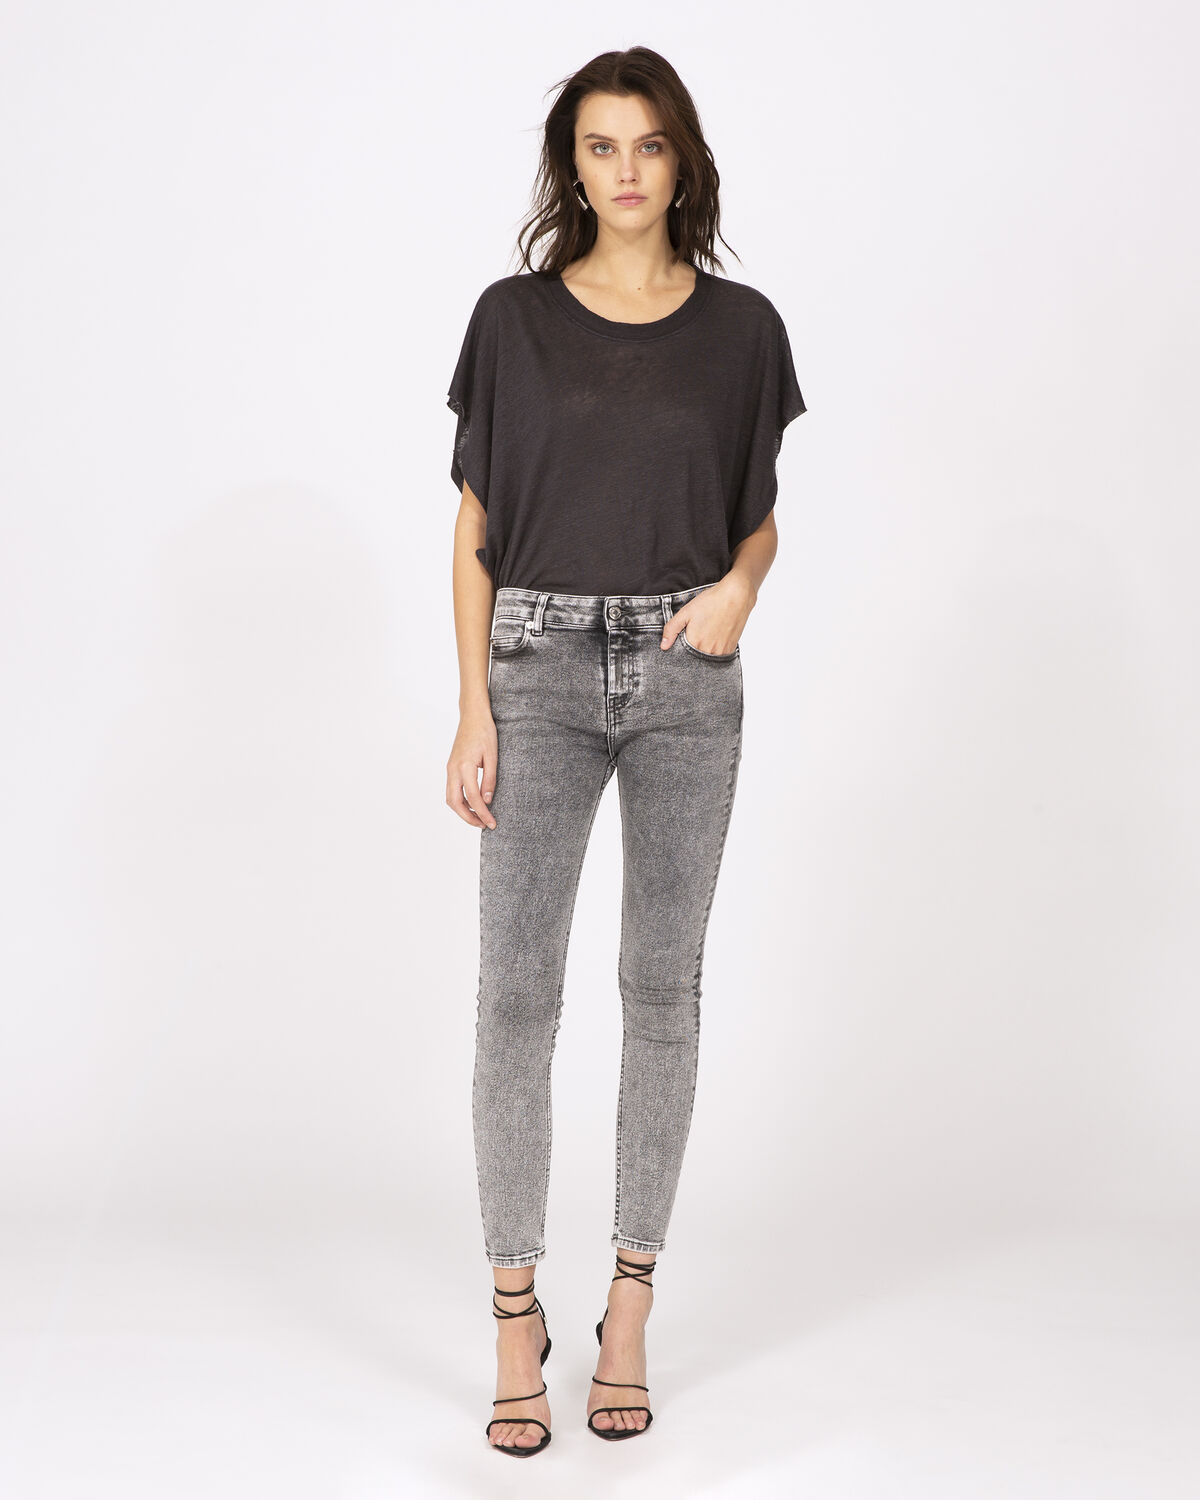 Photo of IRO Paris Optimism Jeans Snow Black - These Faded Grey Skinny Jeans Perfectly Match Your Curves. Wear Them With A Black T-shirt And A Pair Of Sandals For A Resolutely Chic And Casual Look. Spring Summer 19